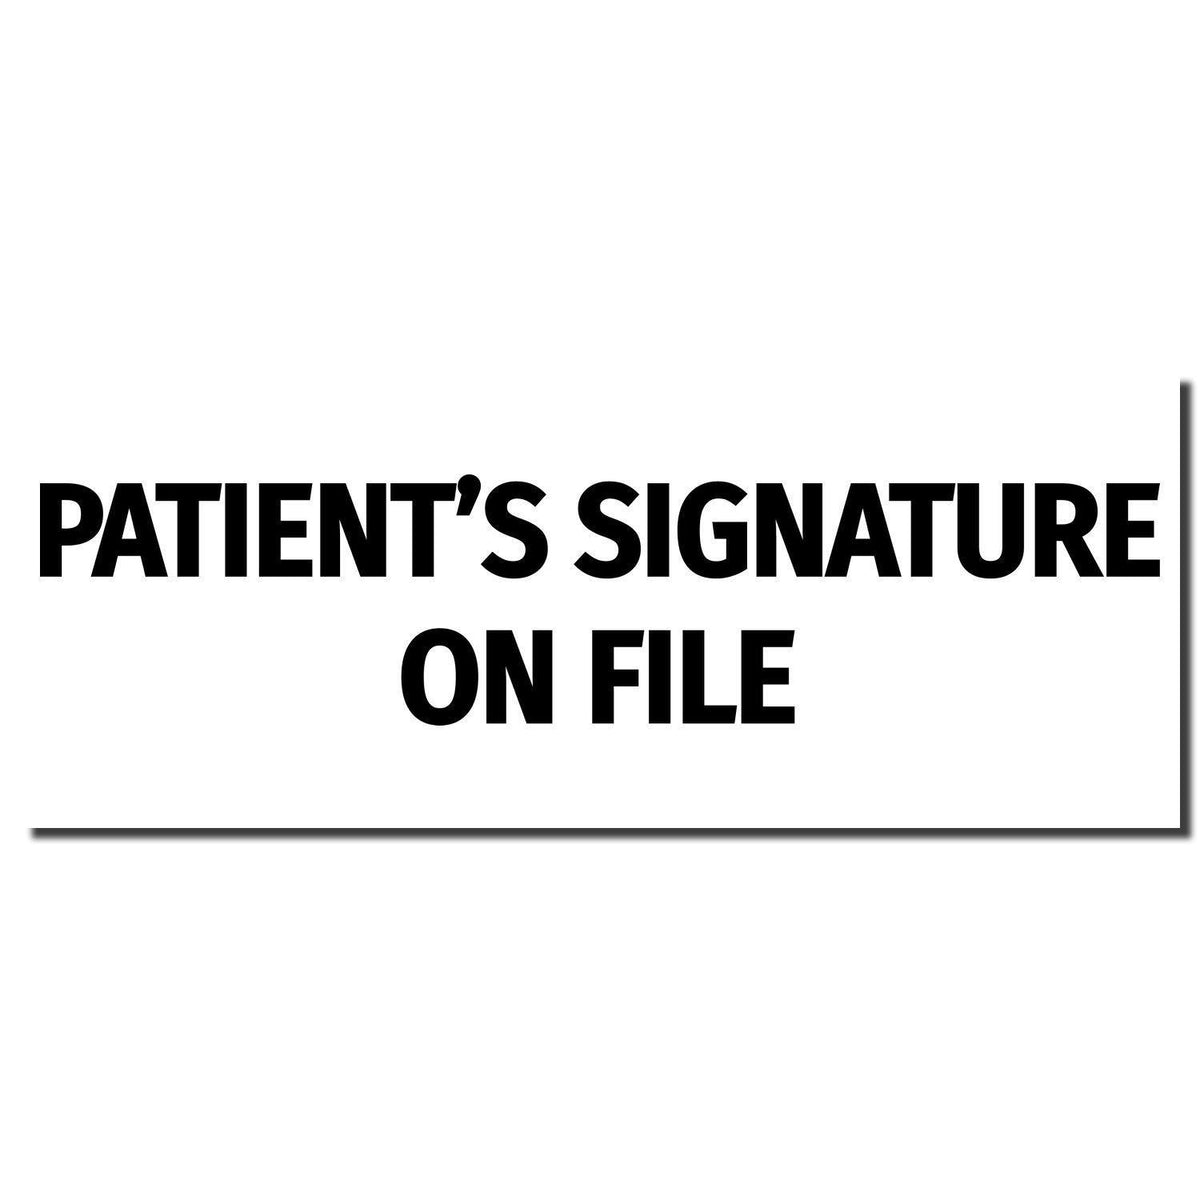 Patients Signature on File Rubber Stamp - Engineer Seal Stamps - Brand_Acorn, Impression Size_Small, Stamp Type_Regular Stamp, Type of Use_Medical Office